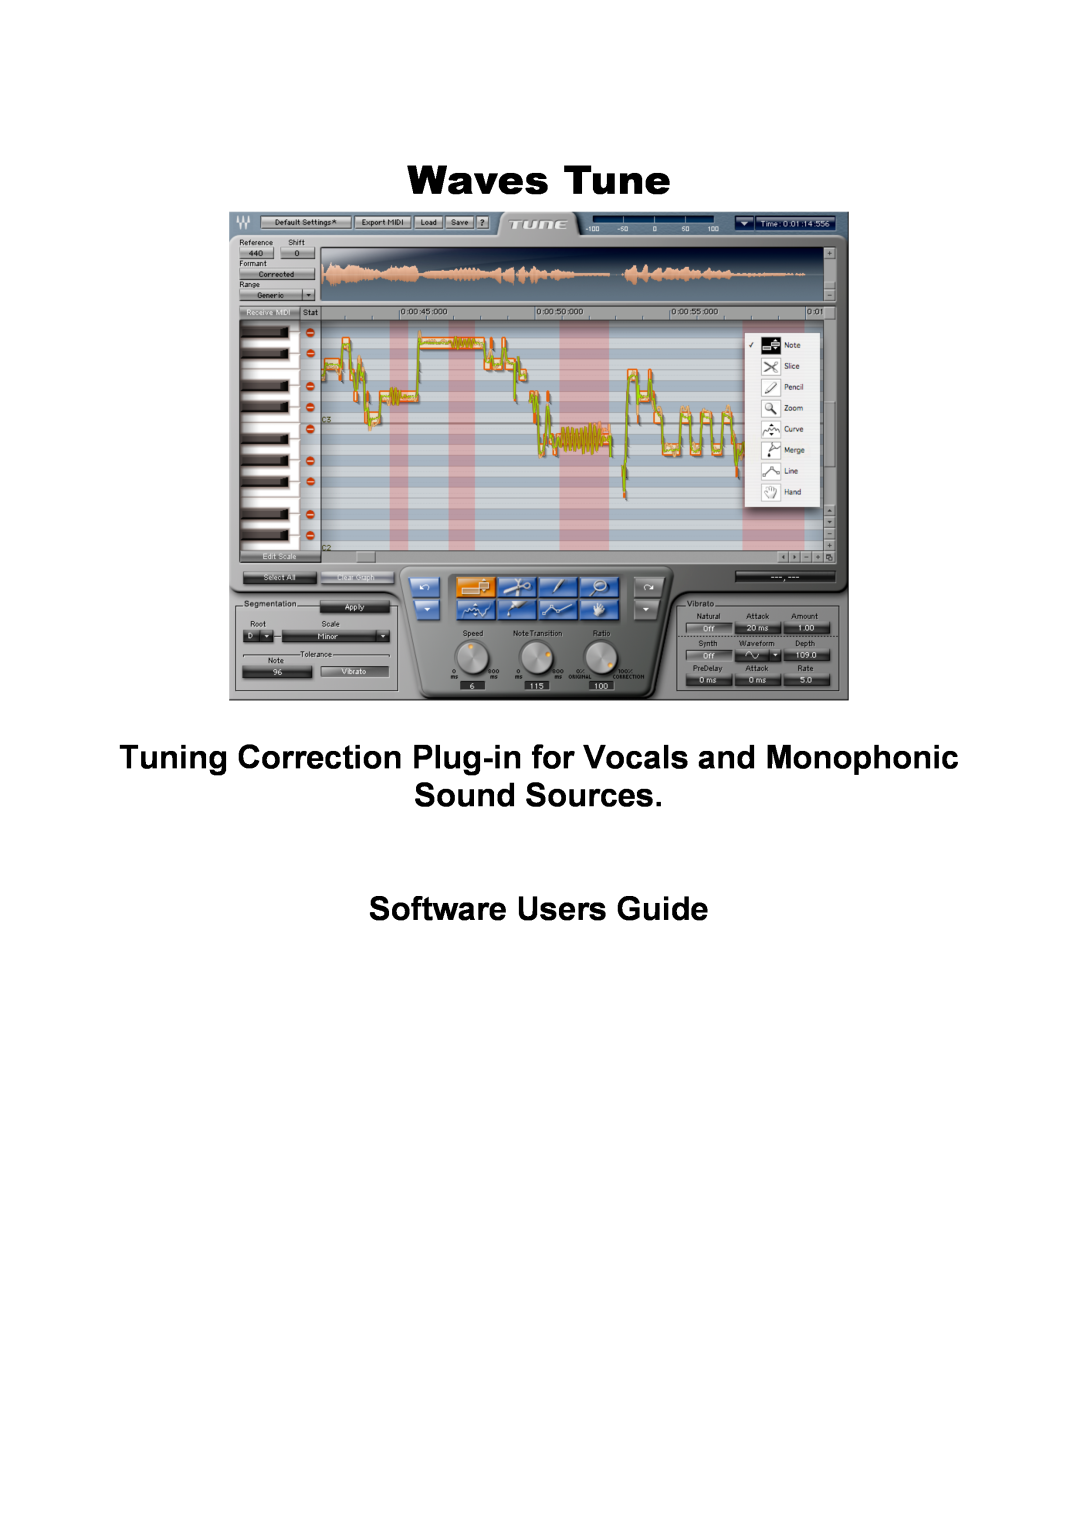 Waves manual Tuning Correction Plug-in for Vocals and Monophonic Sound Sources, Software Users Guide, Waves Tune 